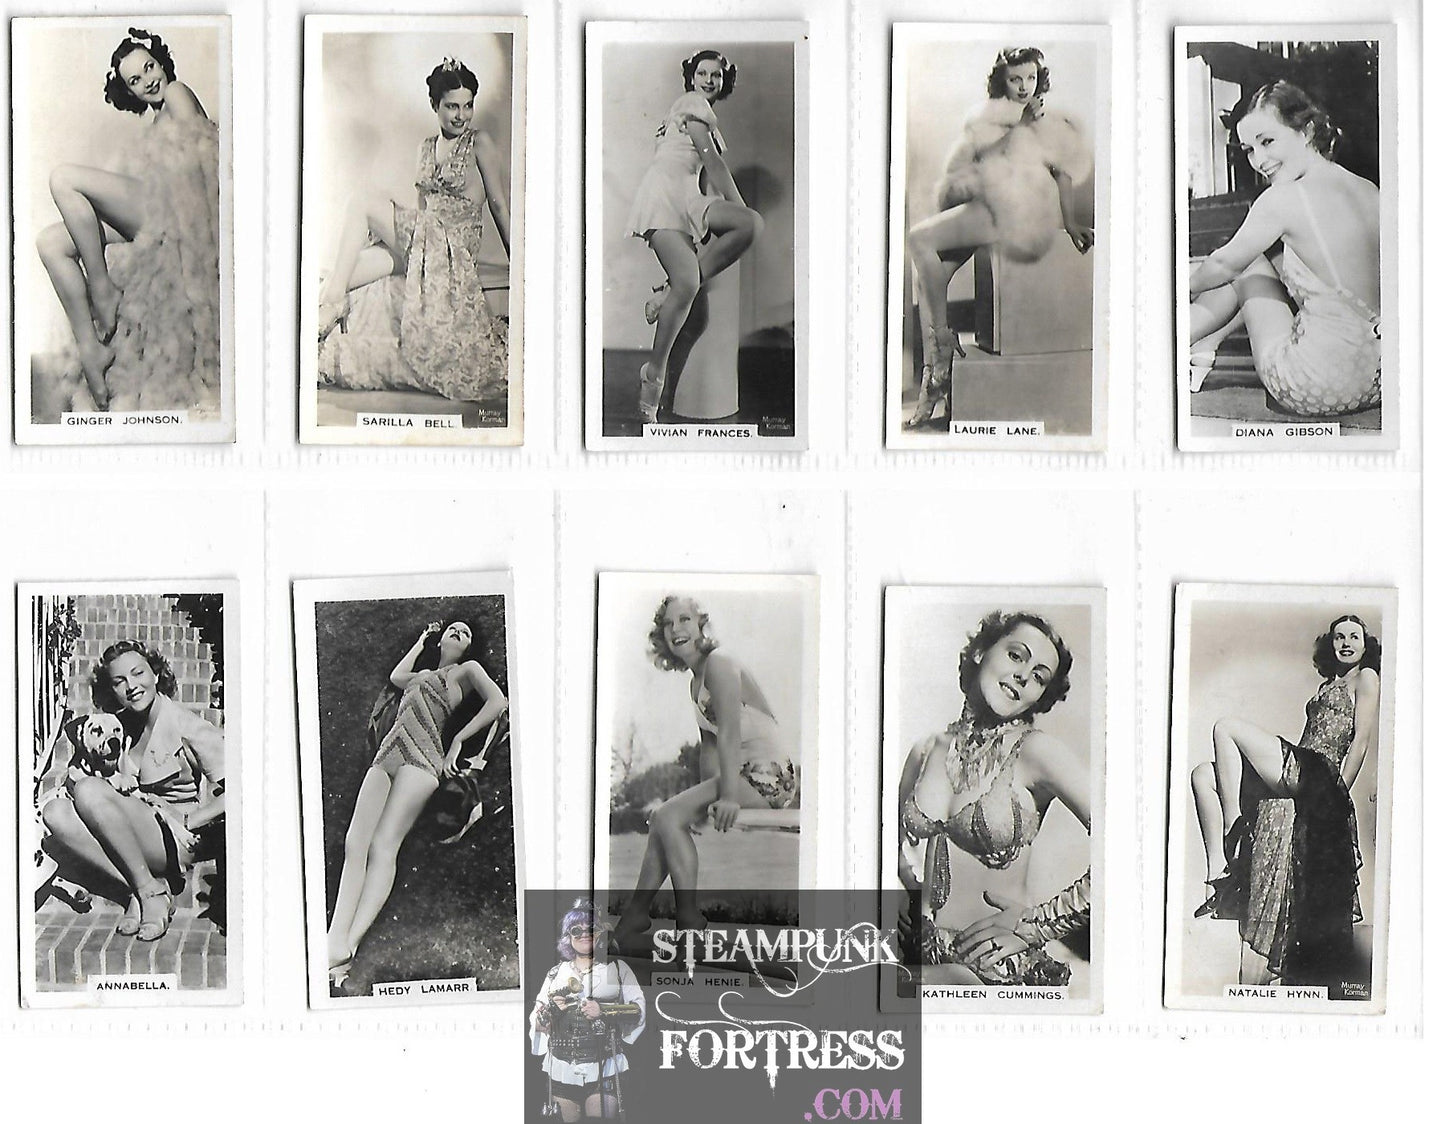 LOT OF 59 CARRERAS CIGARETTE CARDS HOLLYWOOD STARLETS HEDY LAMARR SONJA HENIE ANNABELLA